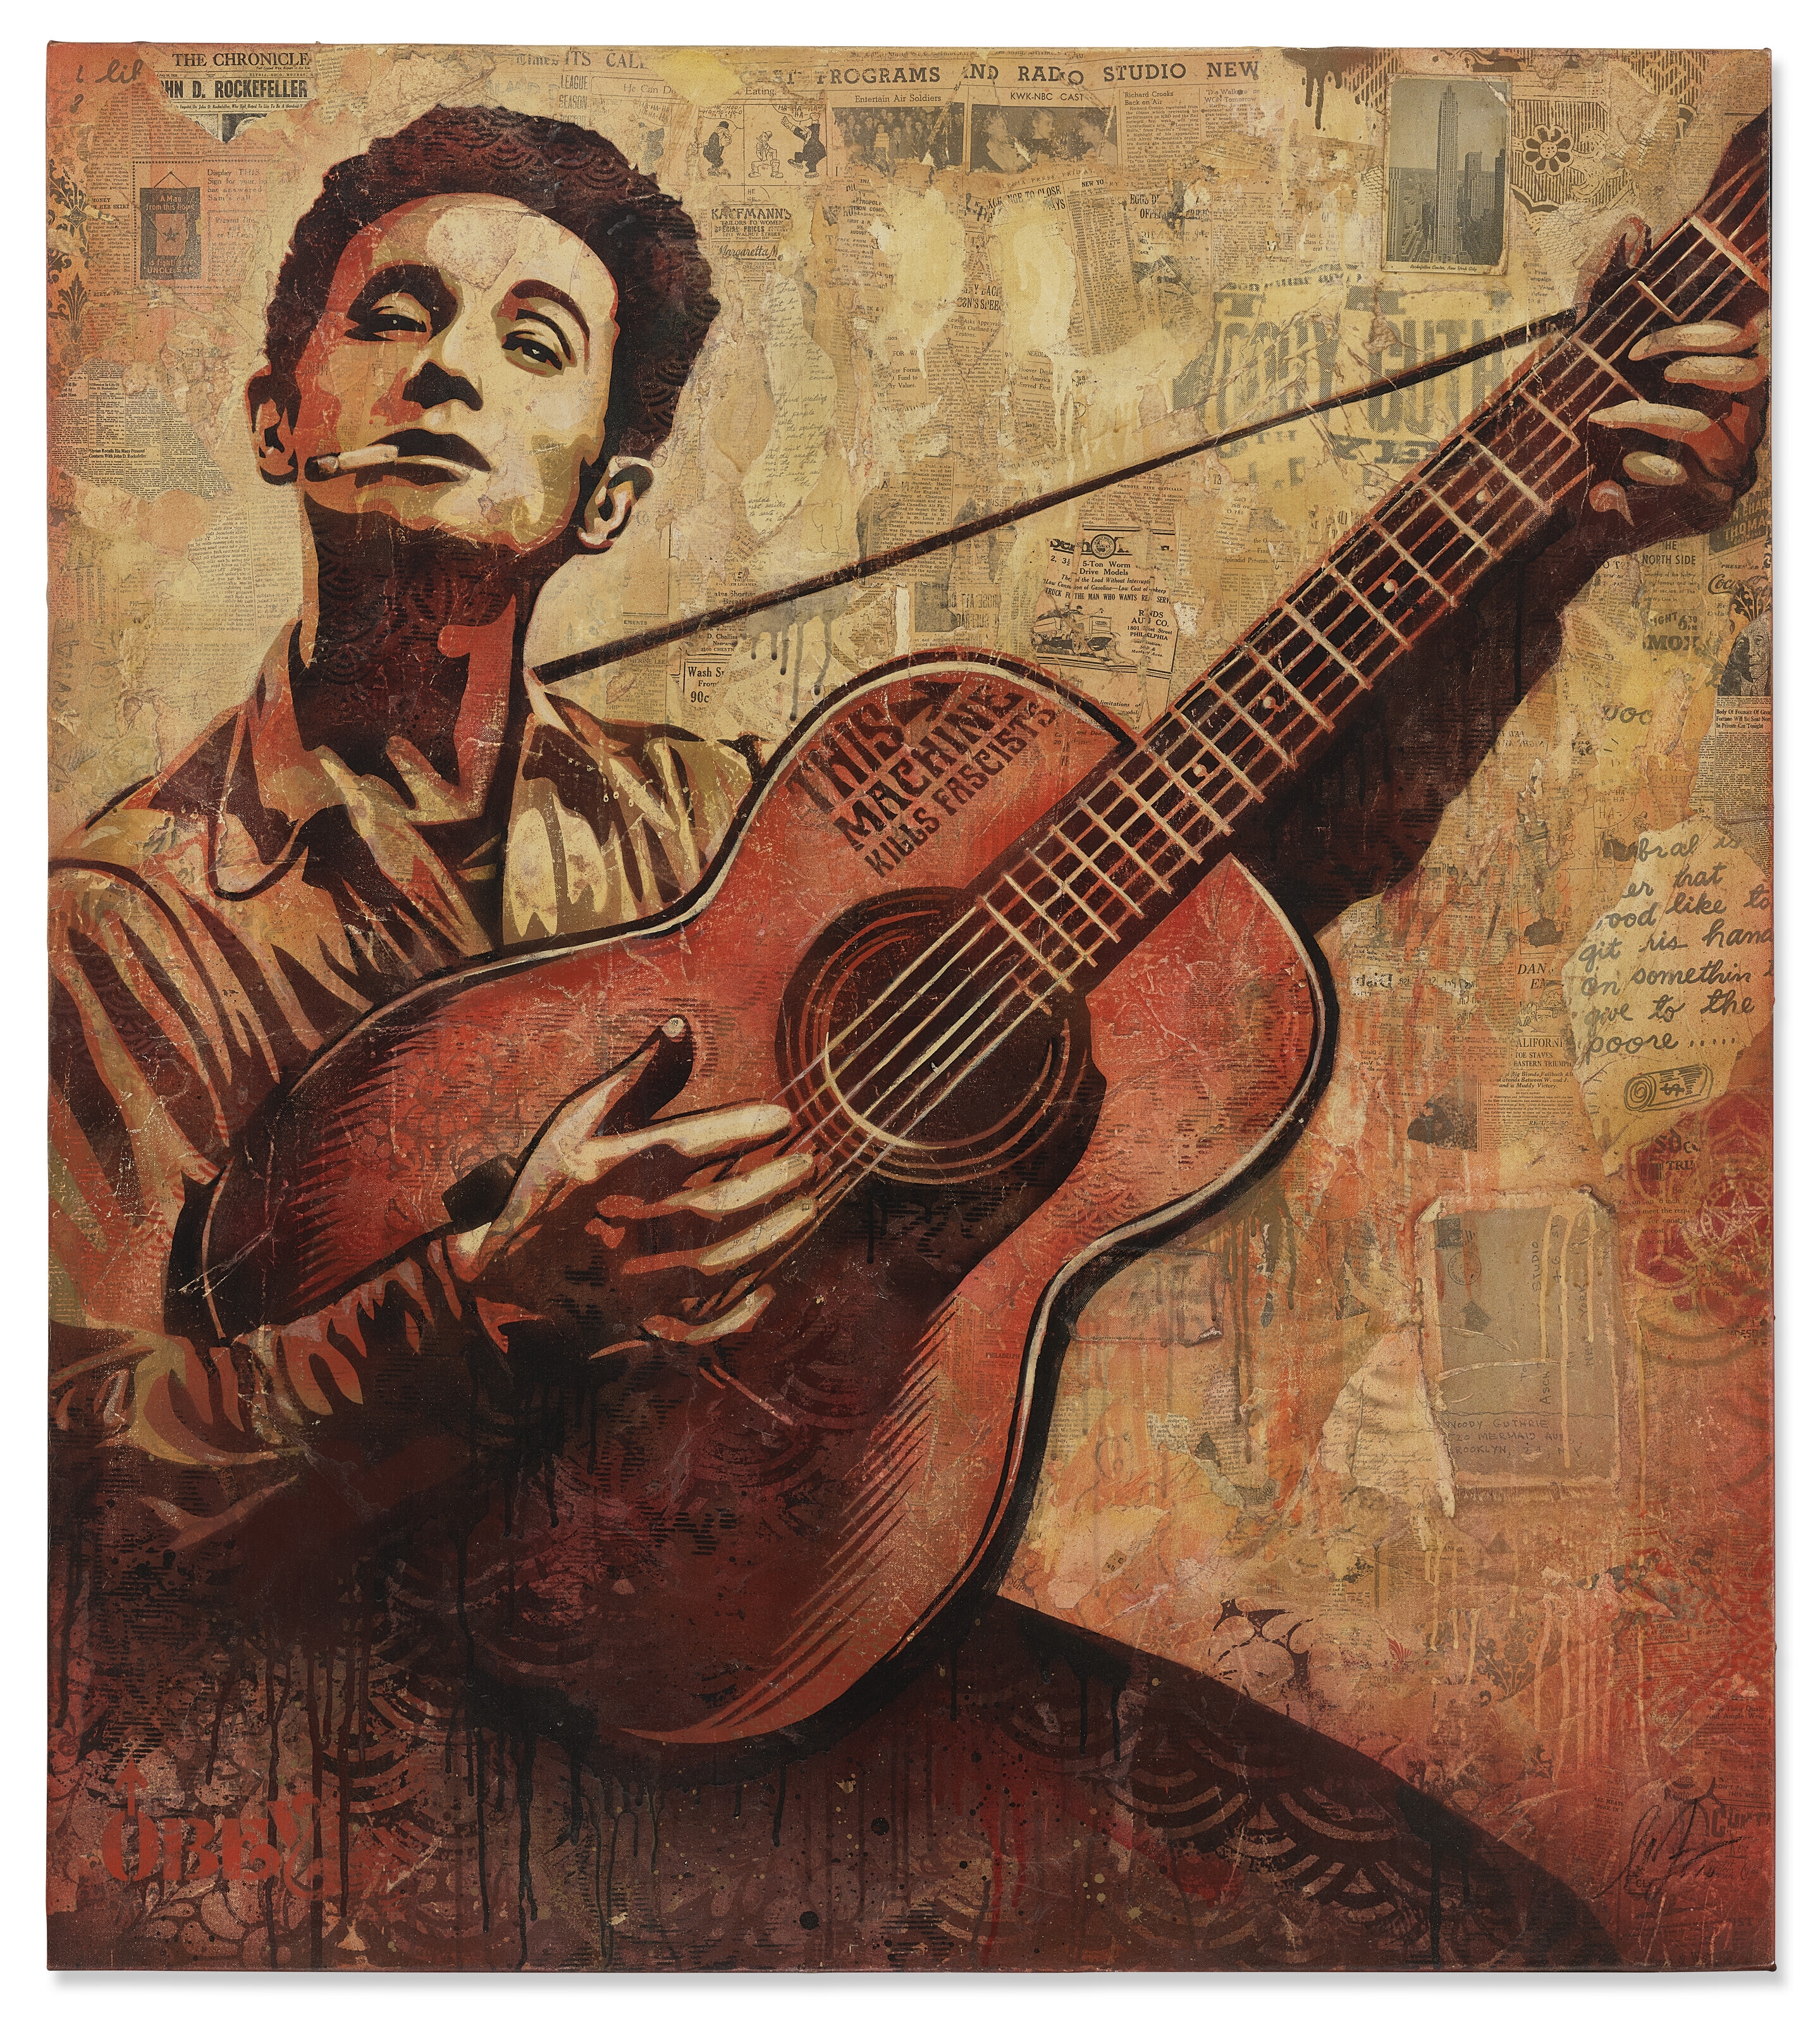 Artwork by Shepard Fairey, Woody Guthrie (2), Made of stencil impression and mixed media collage on canvas